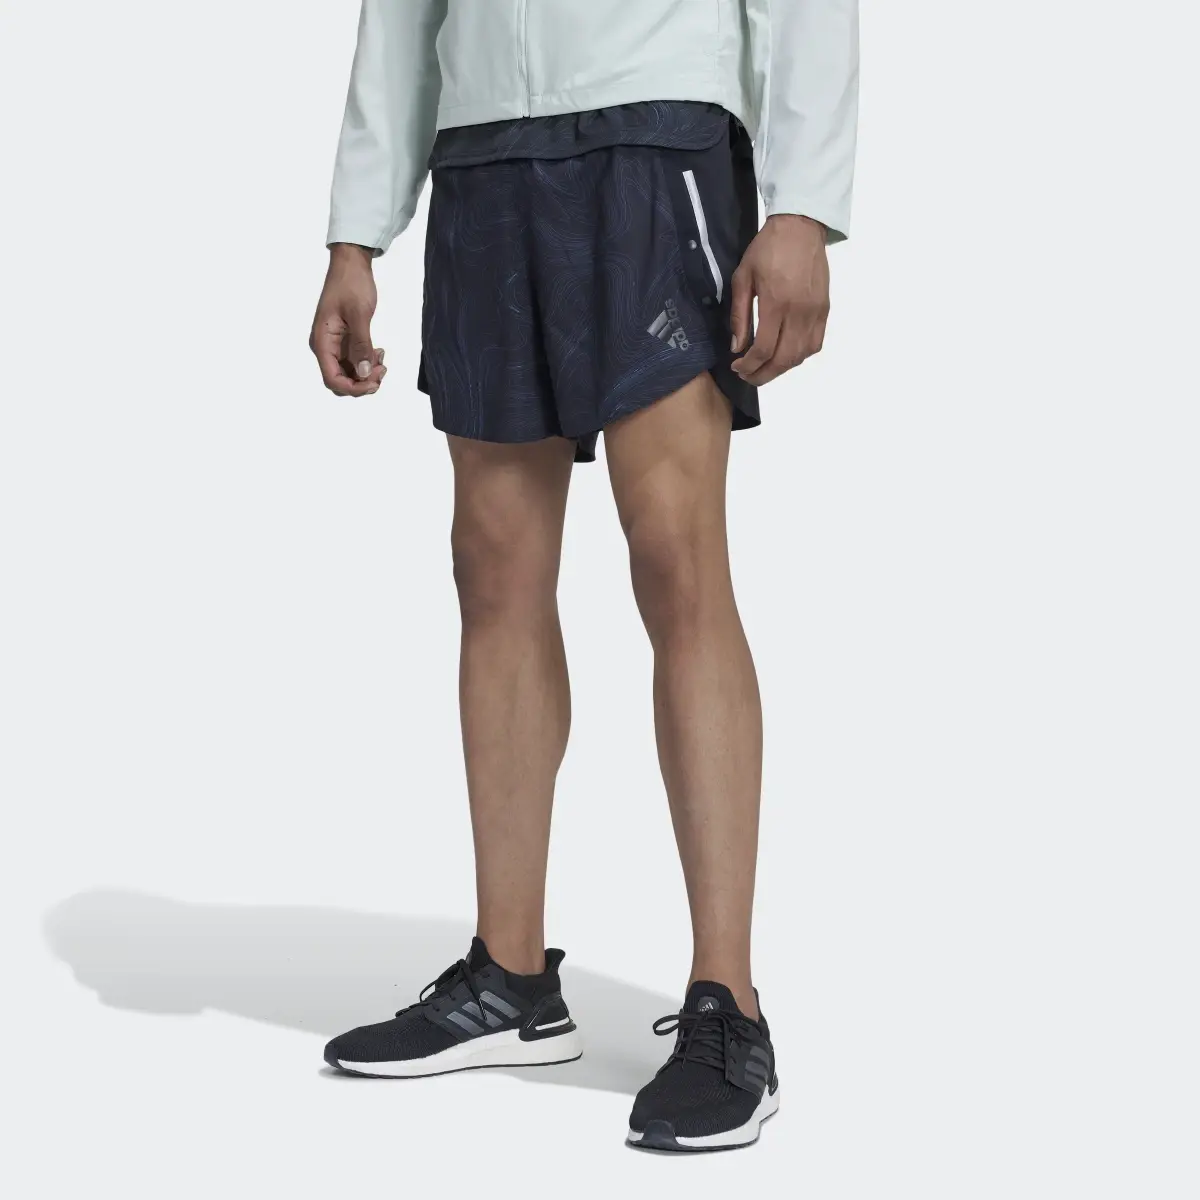 Adidas Shorts Designed for Running for the Oceans. 1